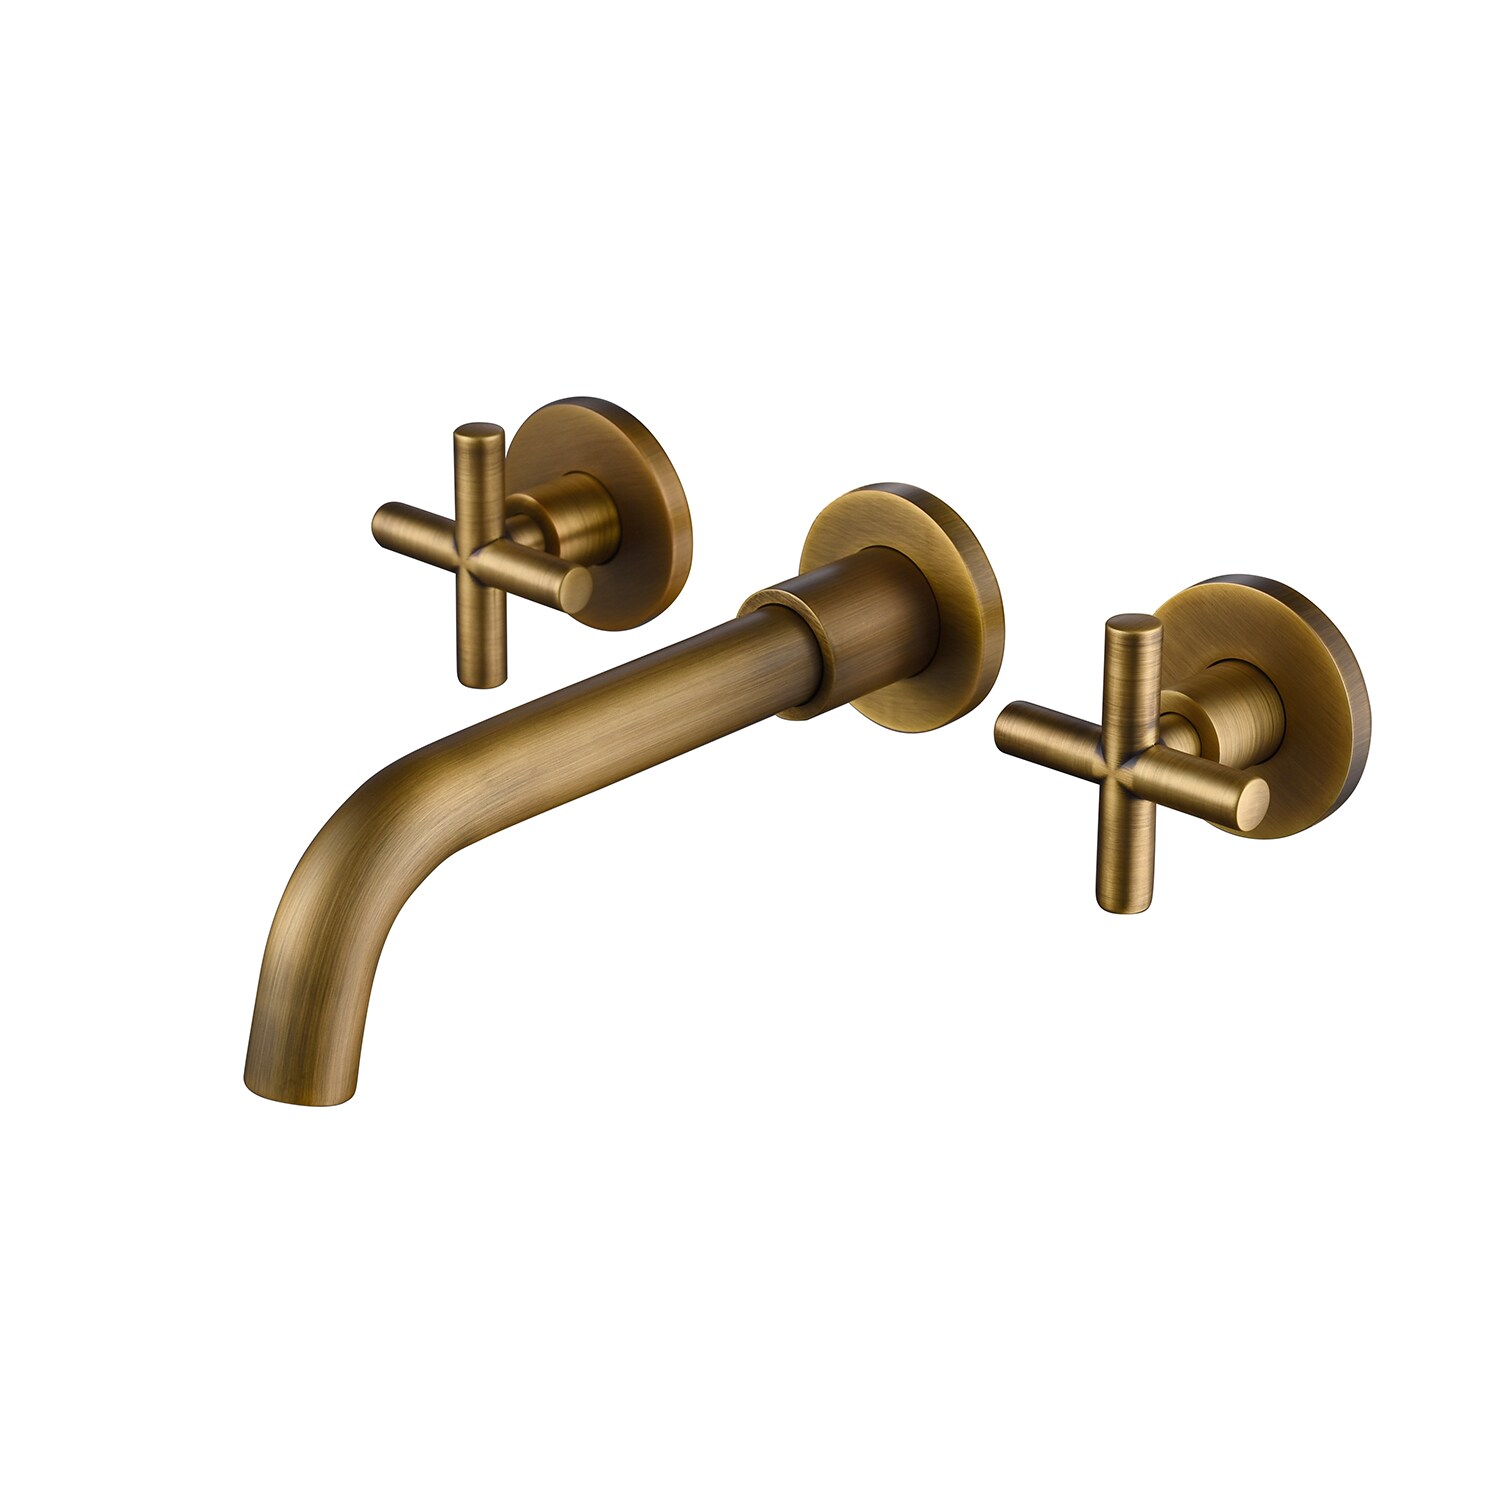 Basin Faucet Wall Mounted Brushed Gold Double Handles Mixer Sink Faucet 2 Holes 